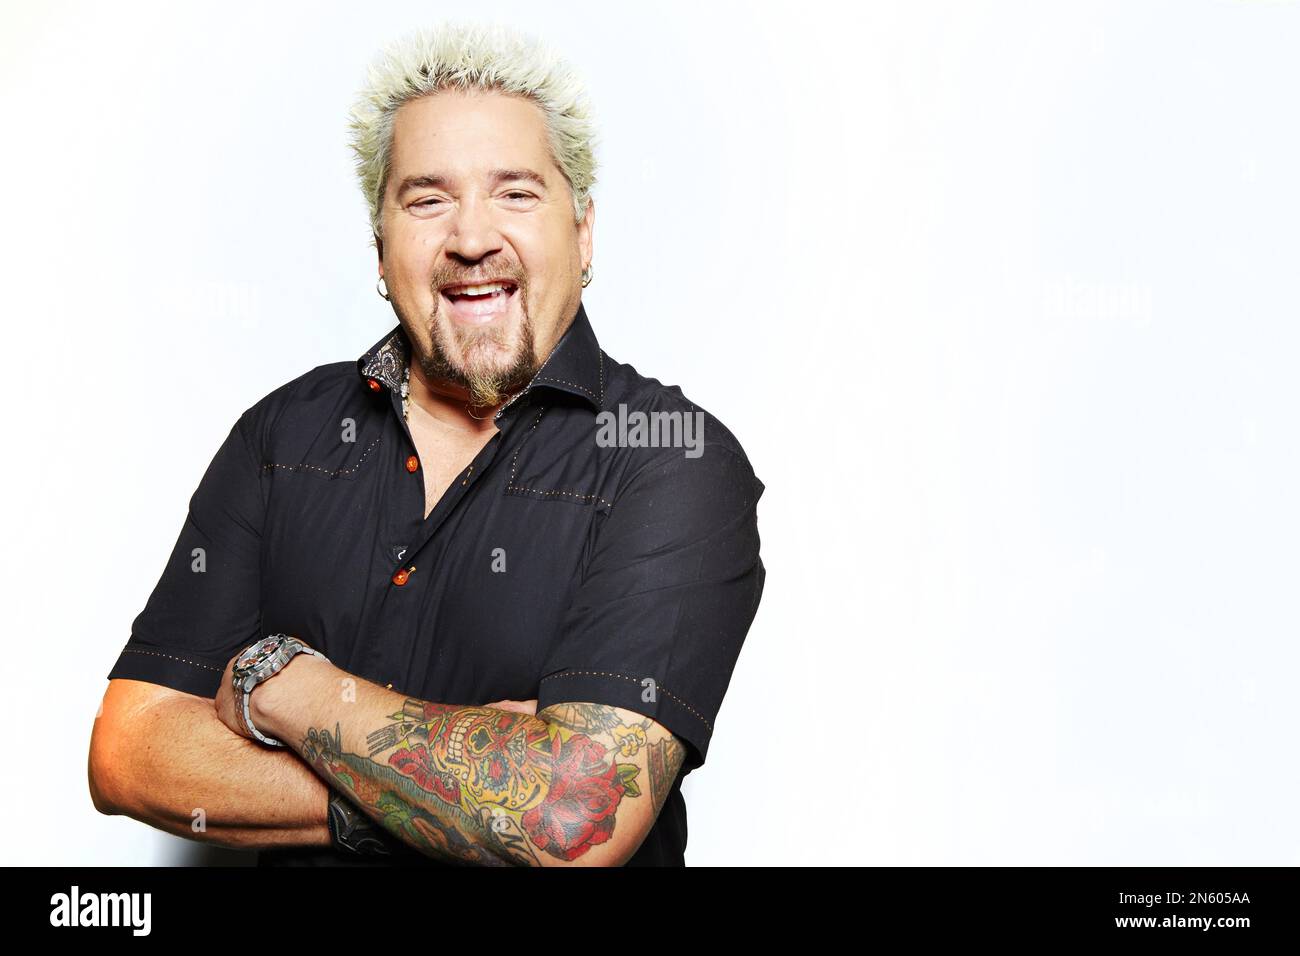 I Cant Unsee Guy Fieri With No Gel In His Hair And I Dont Think I Want  To Unsee It